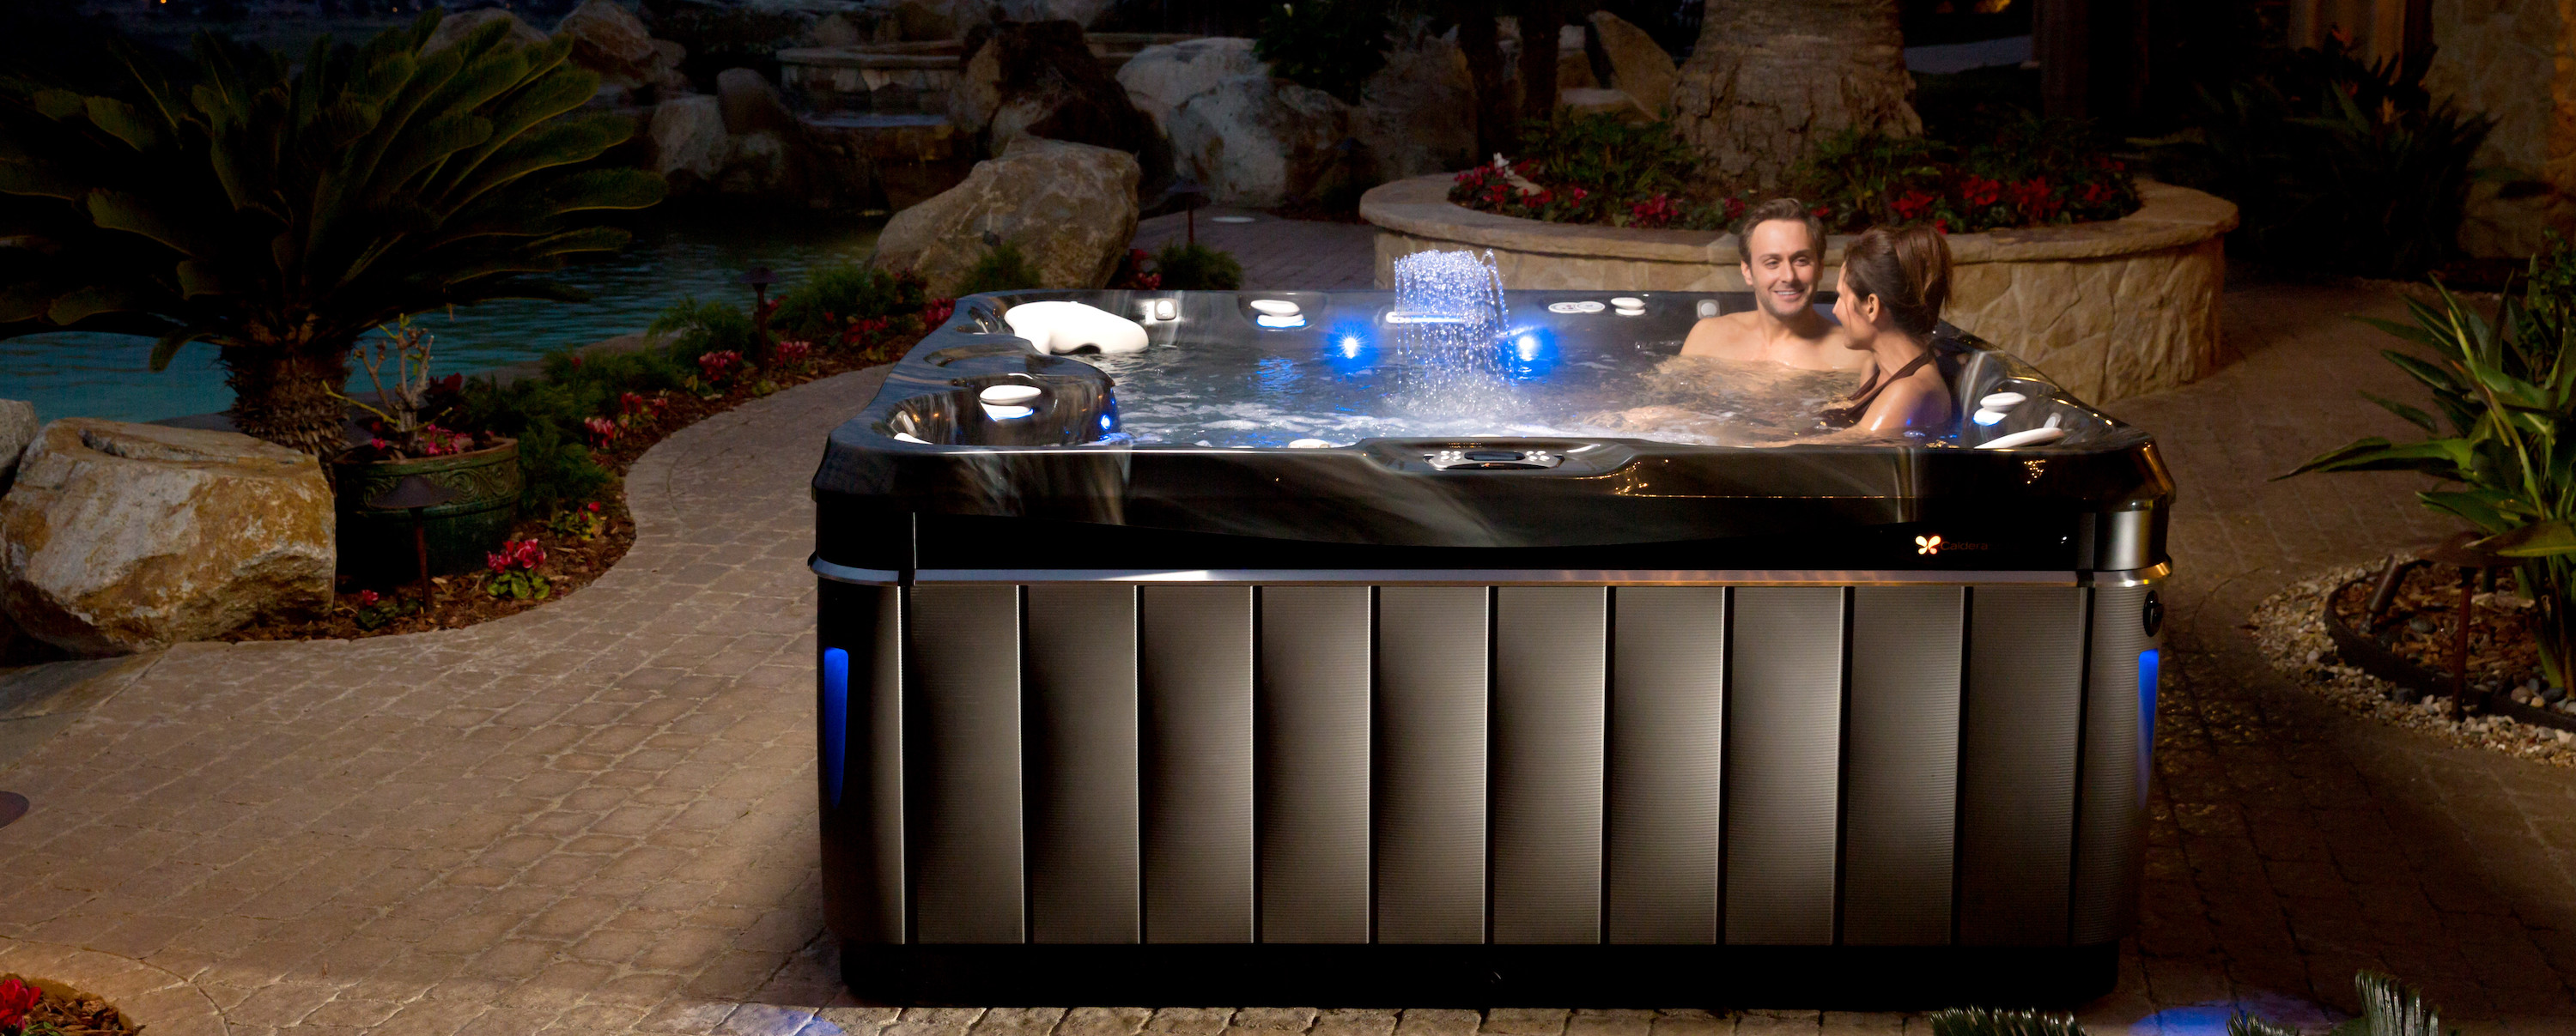 Jacuzzi Vs Hot Tub Vs Spa What’s The Difference Caldera Spas